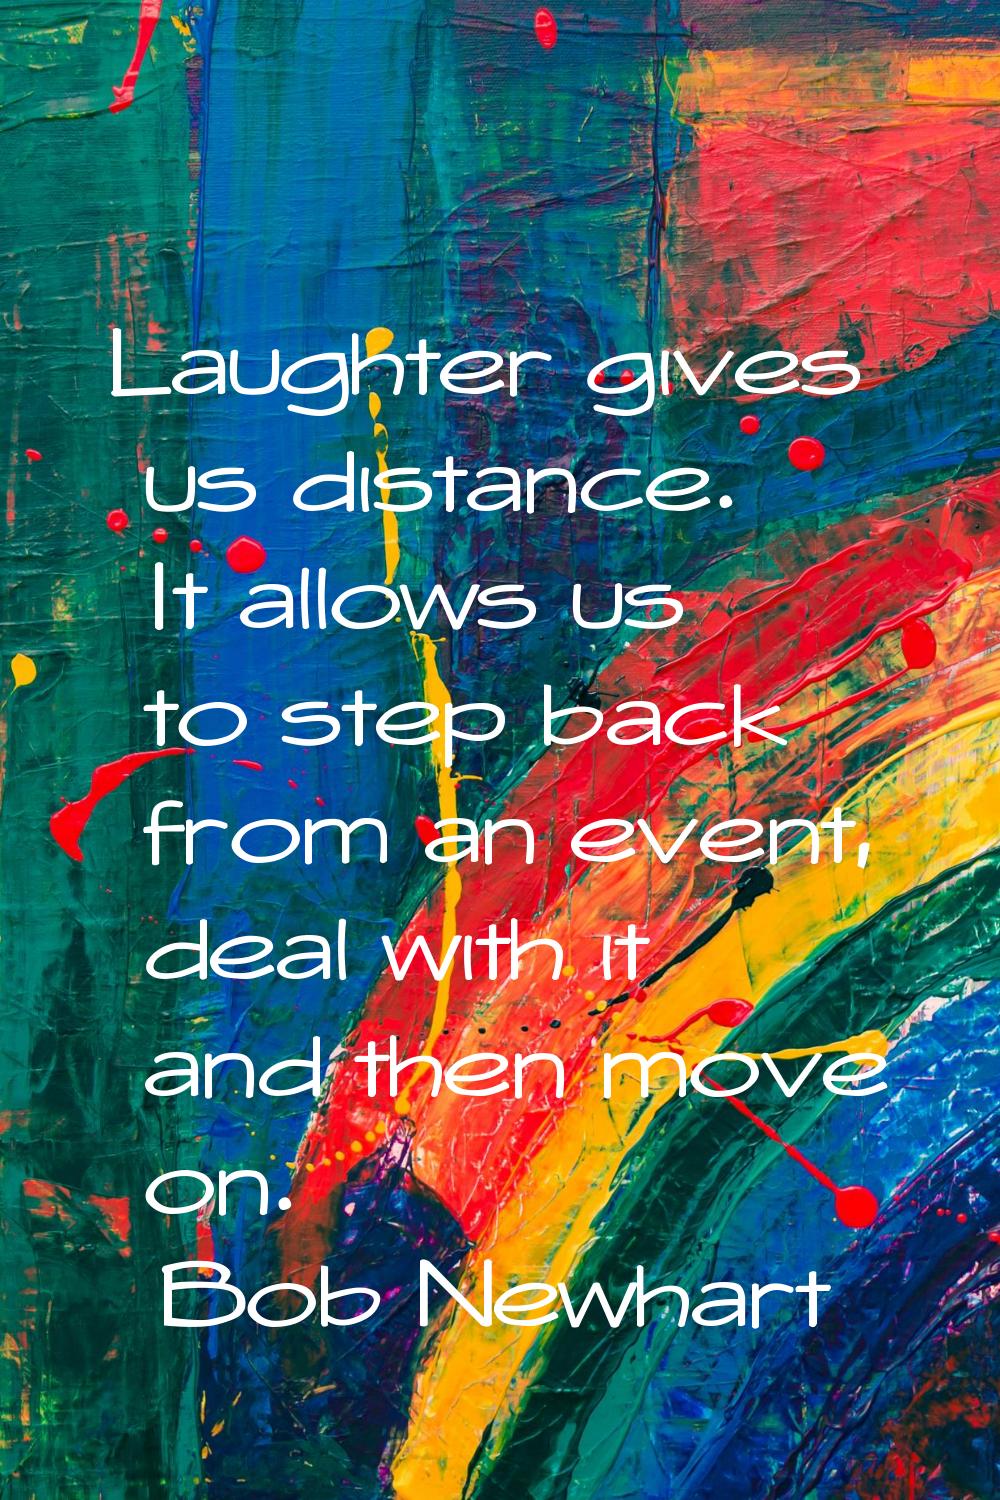 Laughter gives us distance. It allows us to step back from an event, deal with it and then move on.